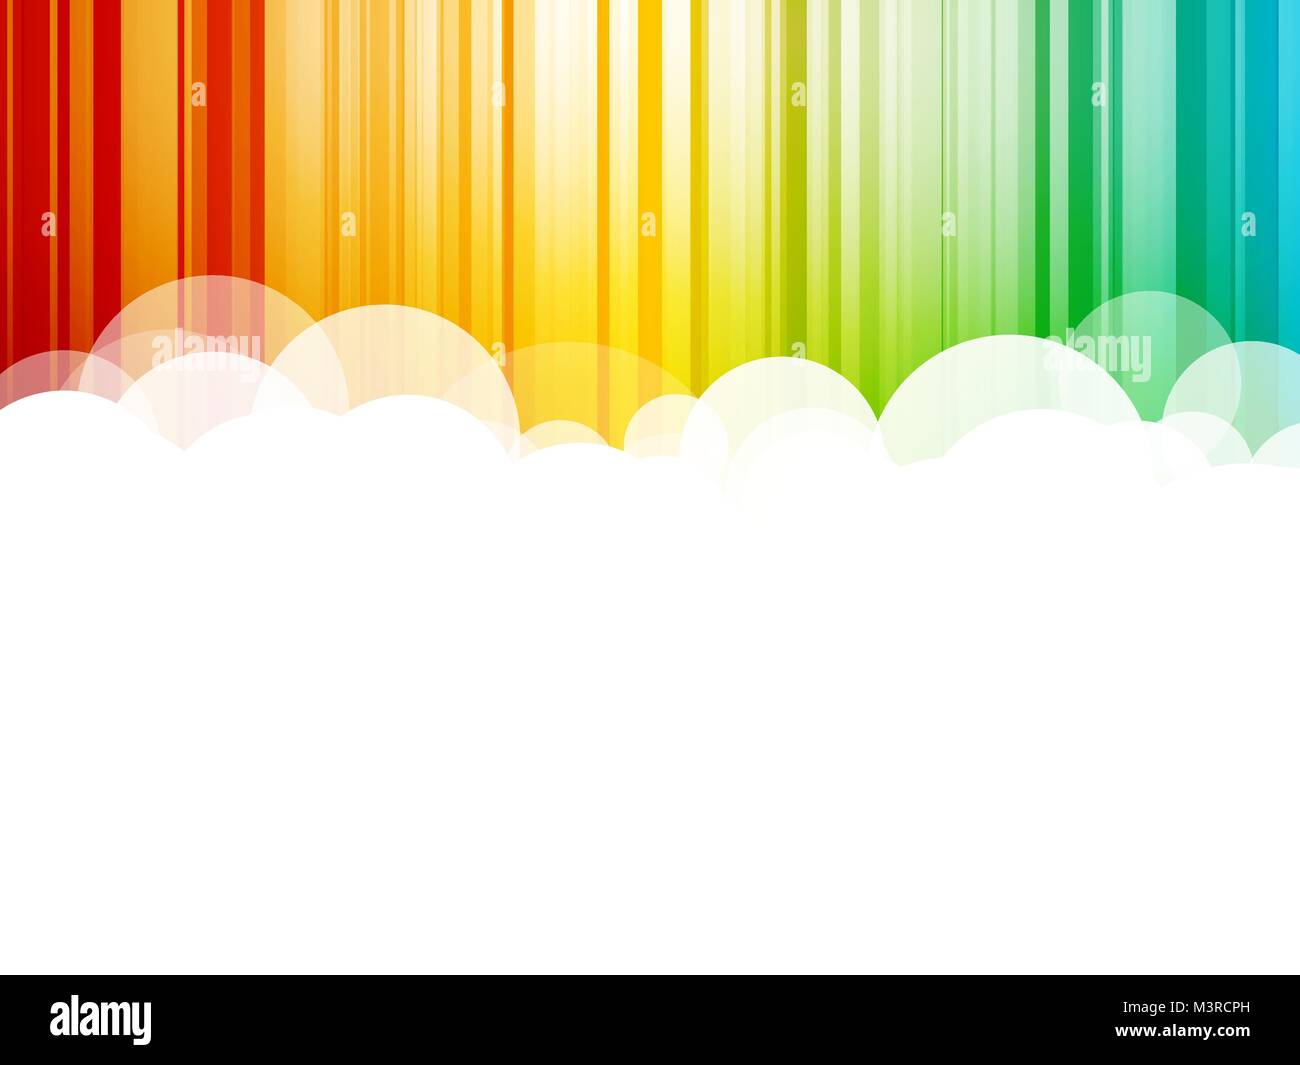 Abstract clouds background colorful stripes Stock Vector